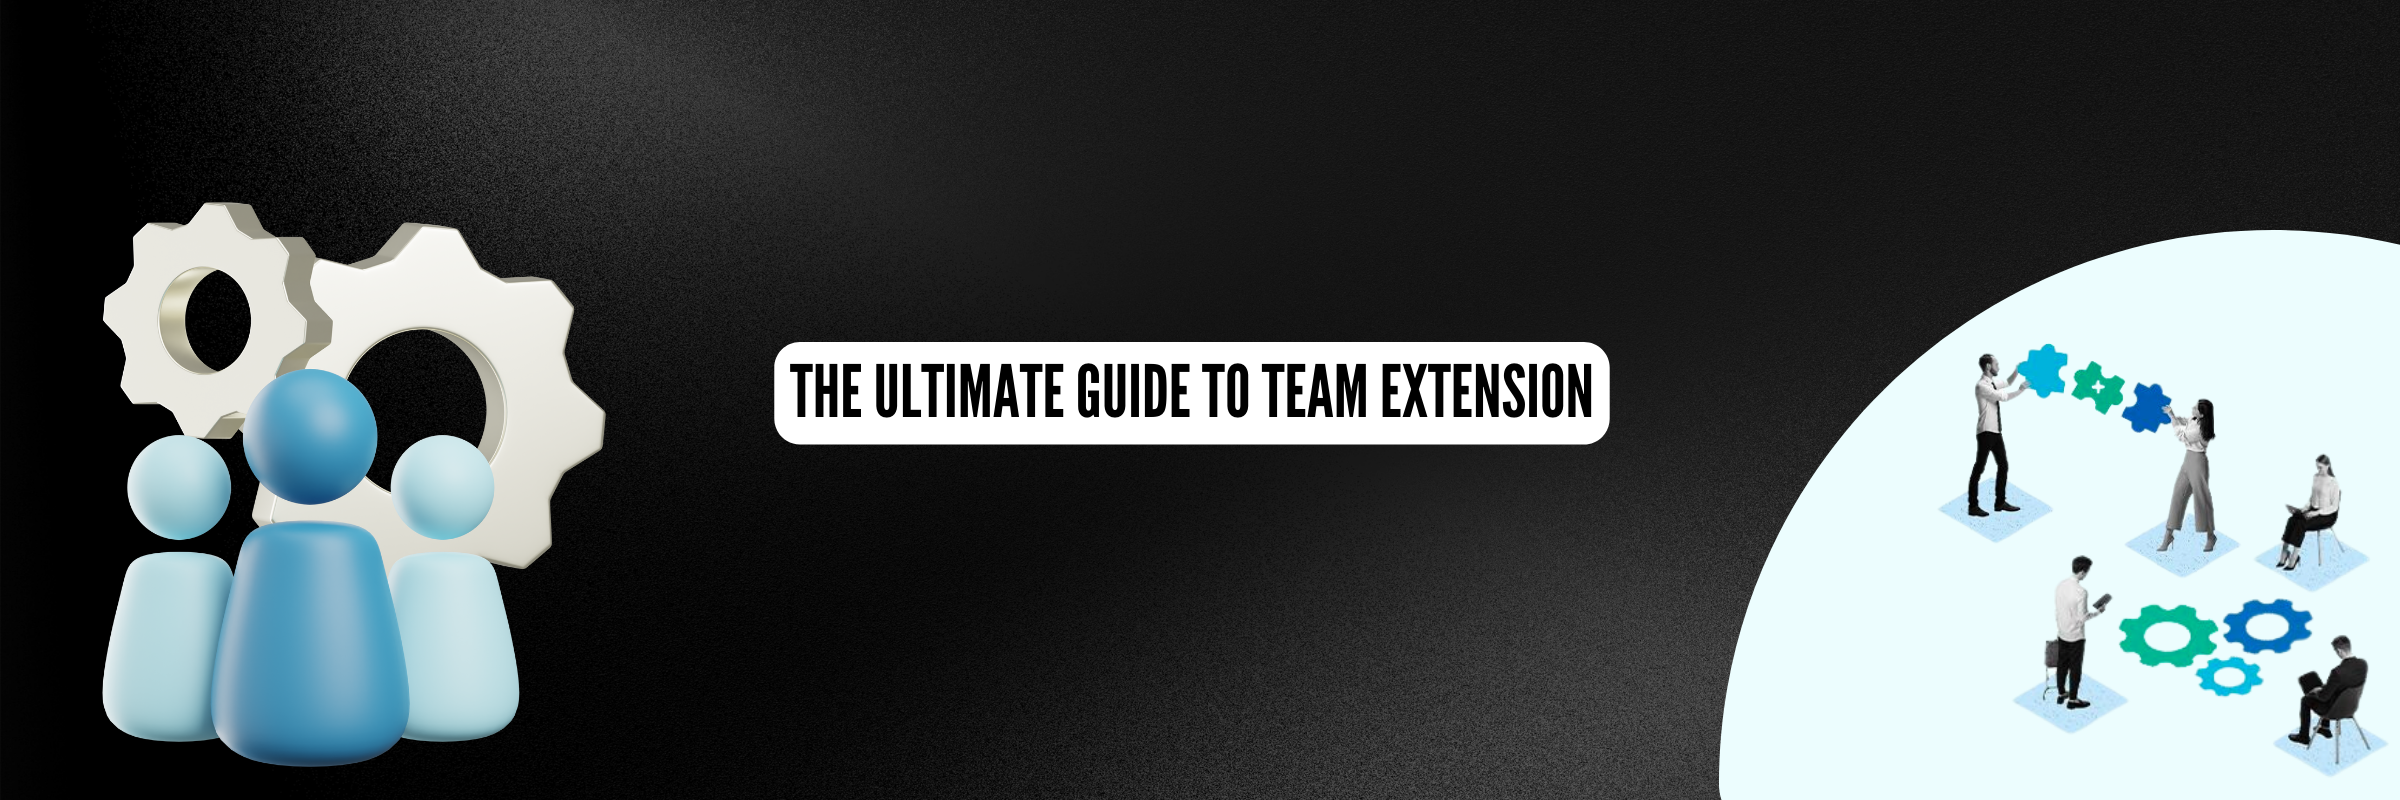 The Ultimate Guide to Team Extension